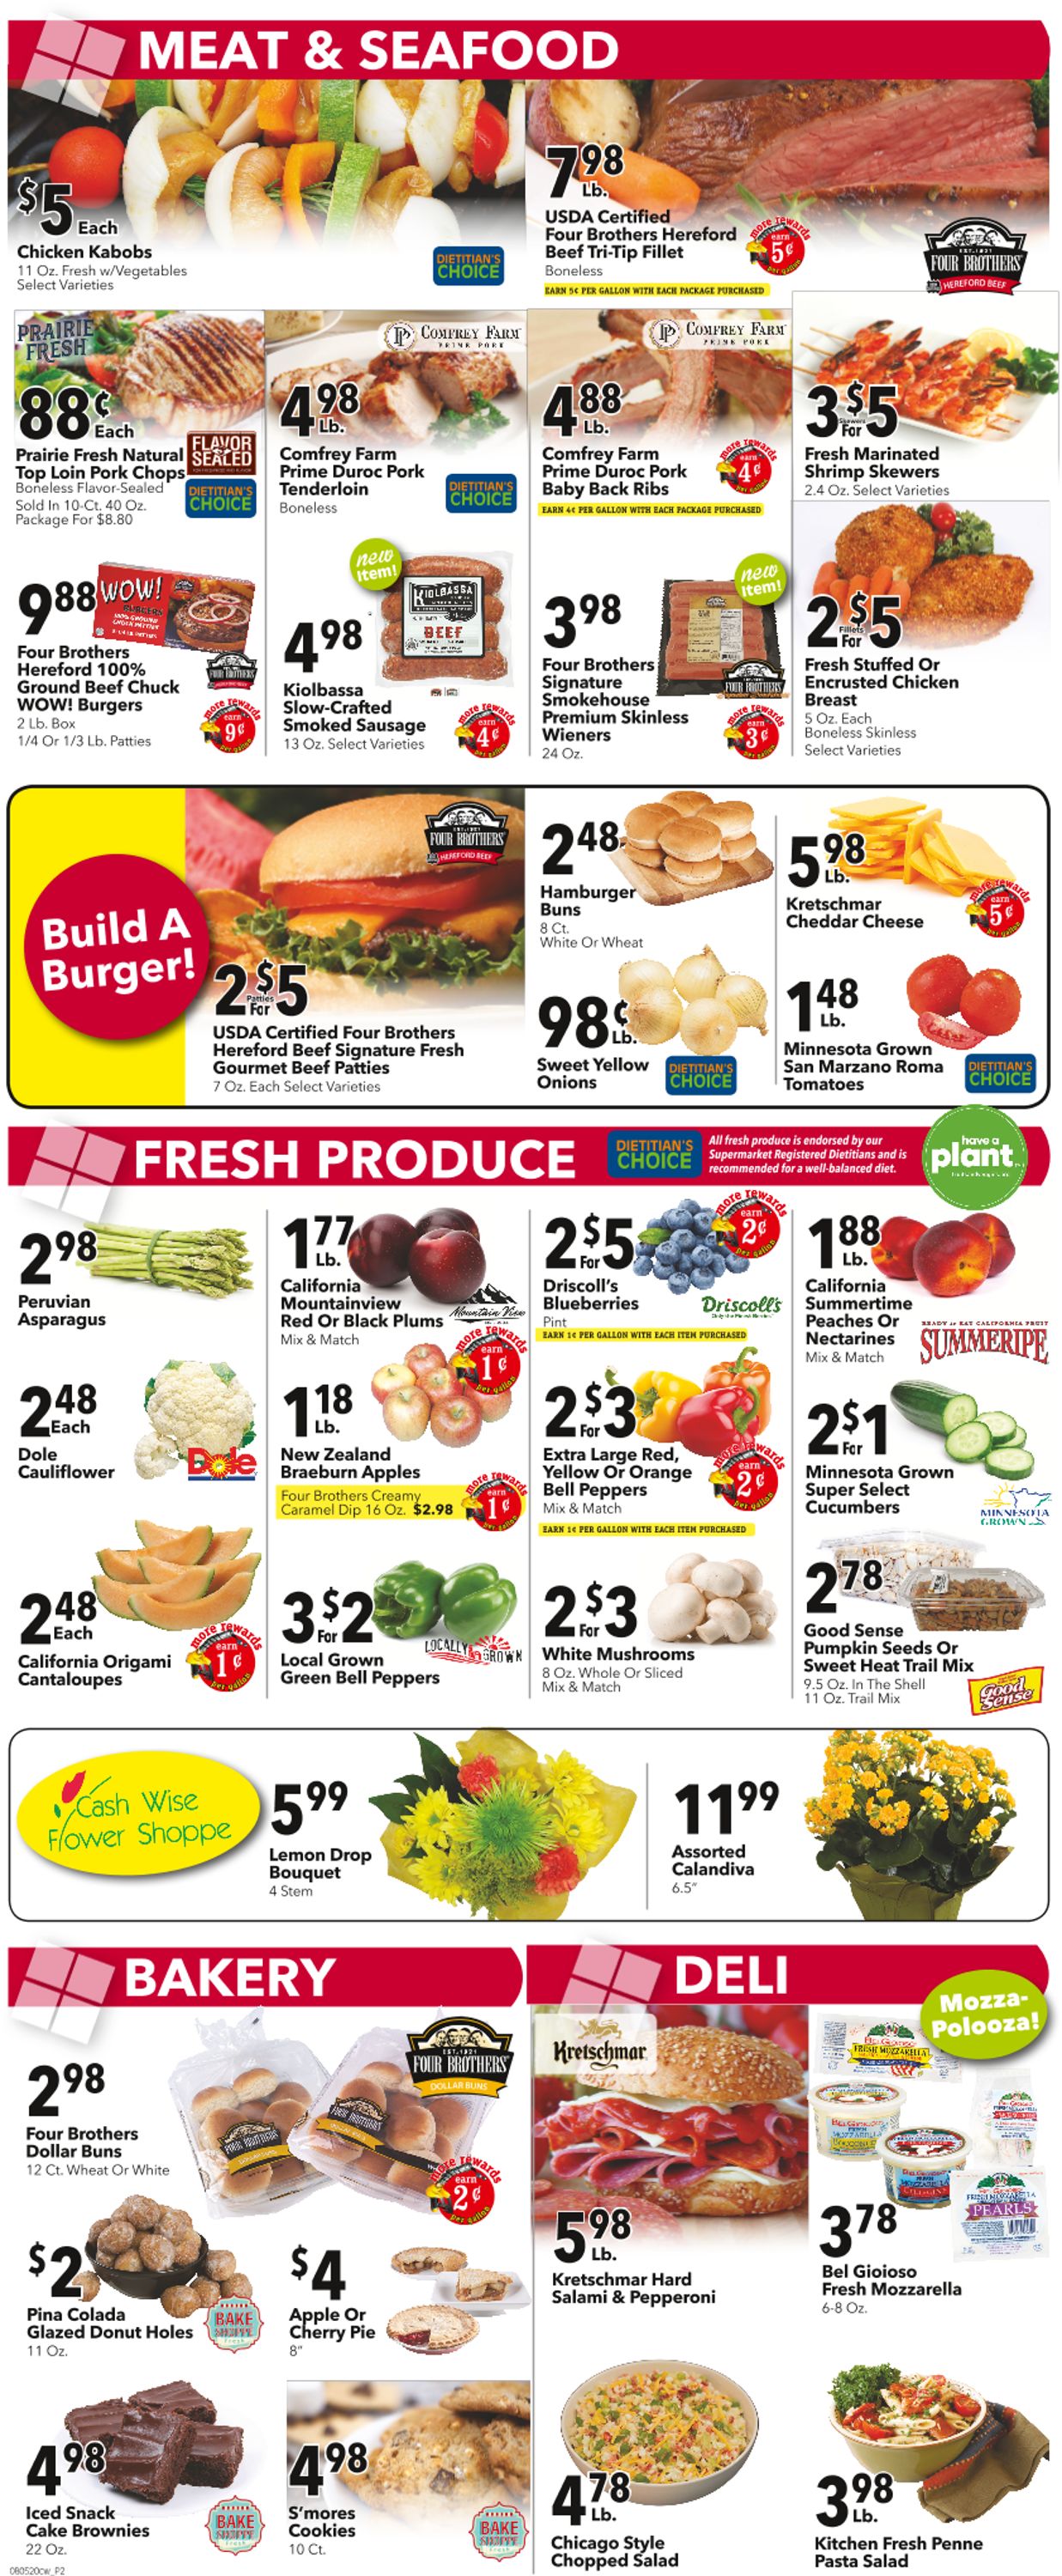 Cash Wise Weekly Ad Circular - valid 08/05-08/11/2020 (Page 2)